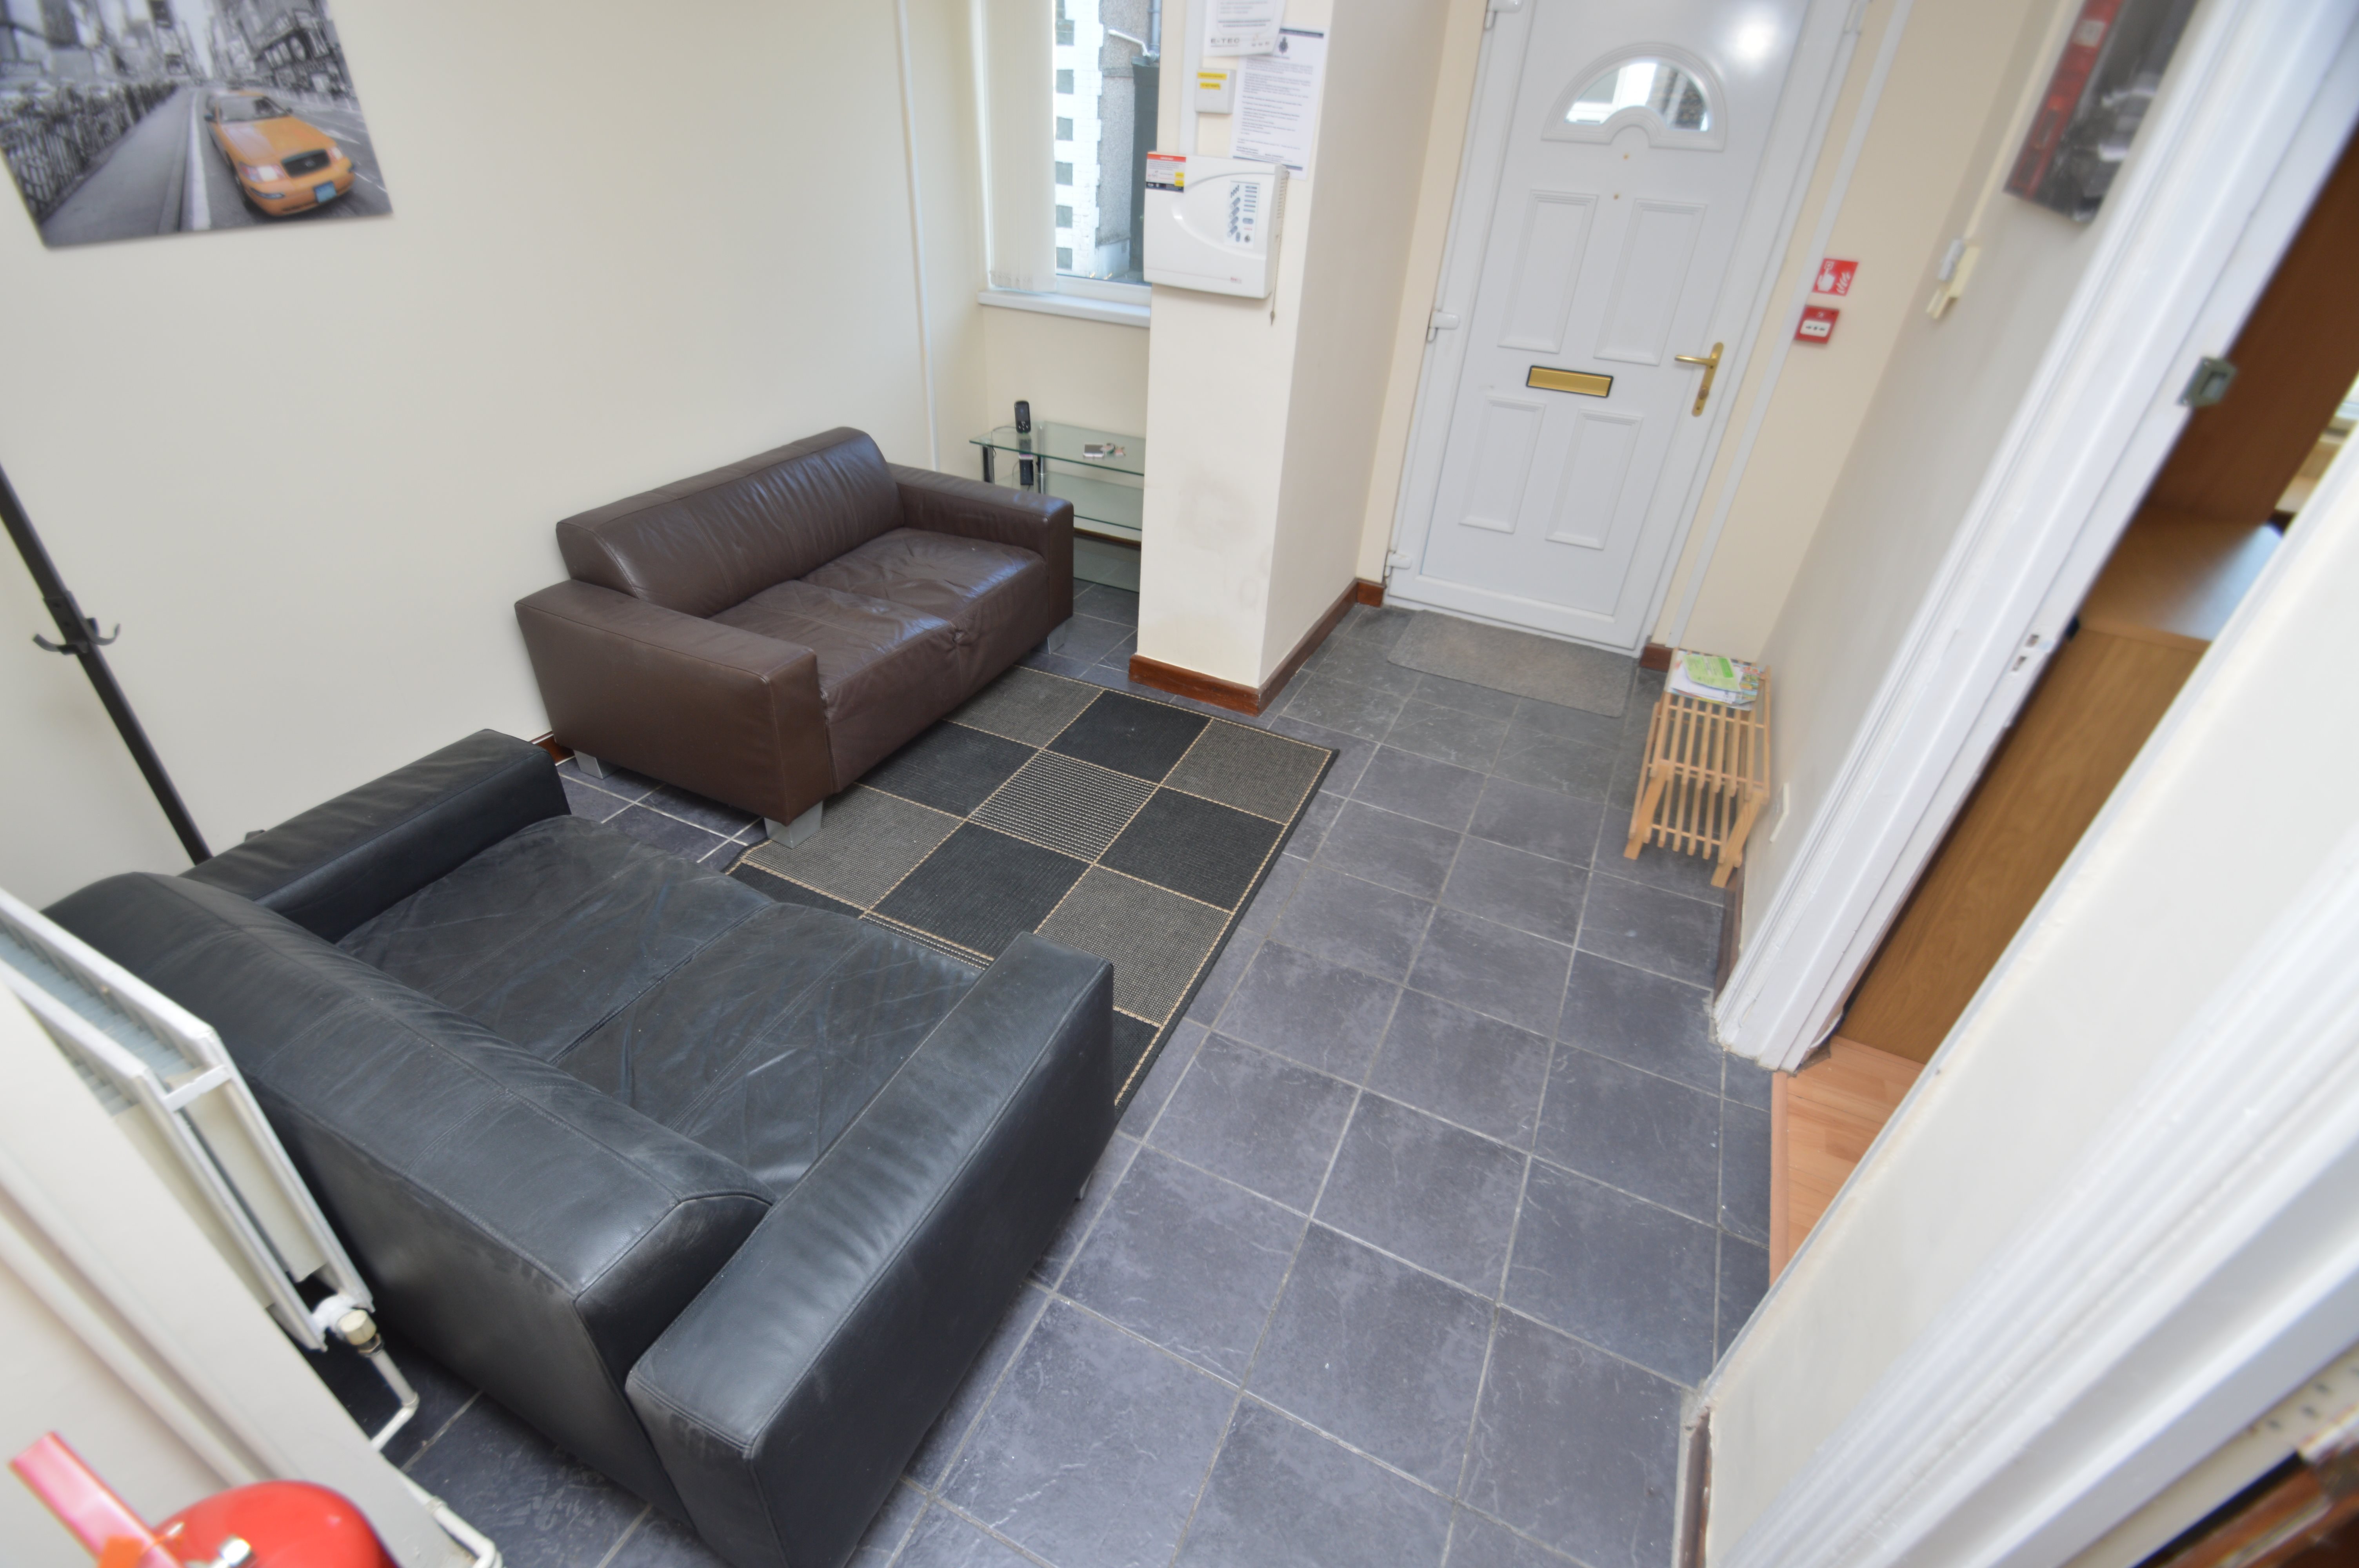 1 bed house / flat share to rent in Wood Road , Treforest   - Property Image 7